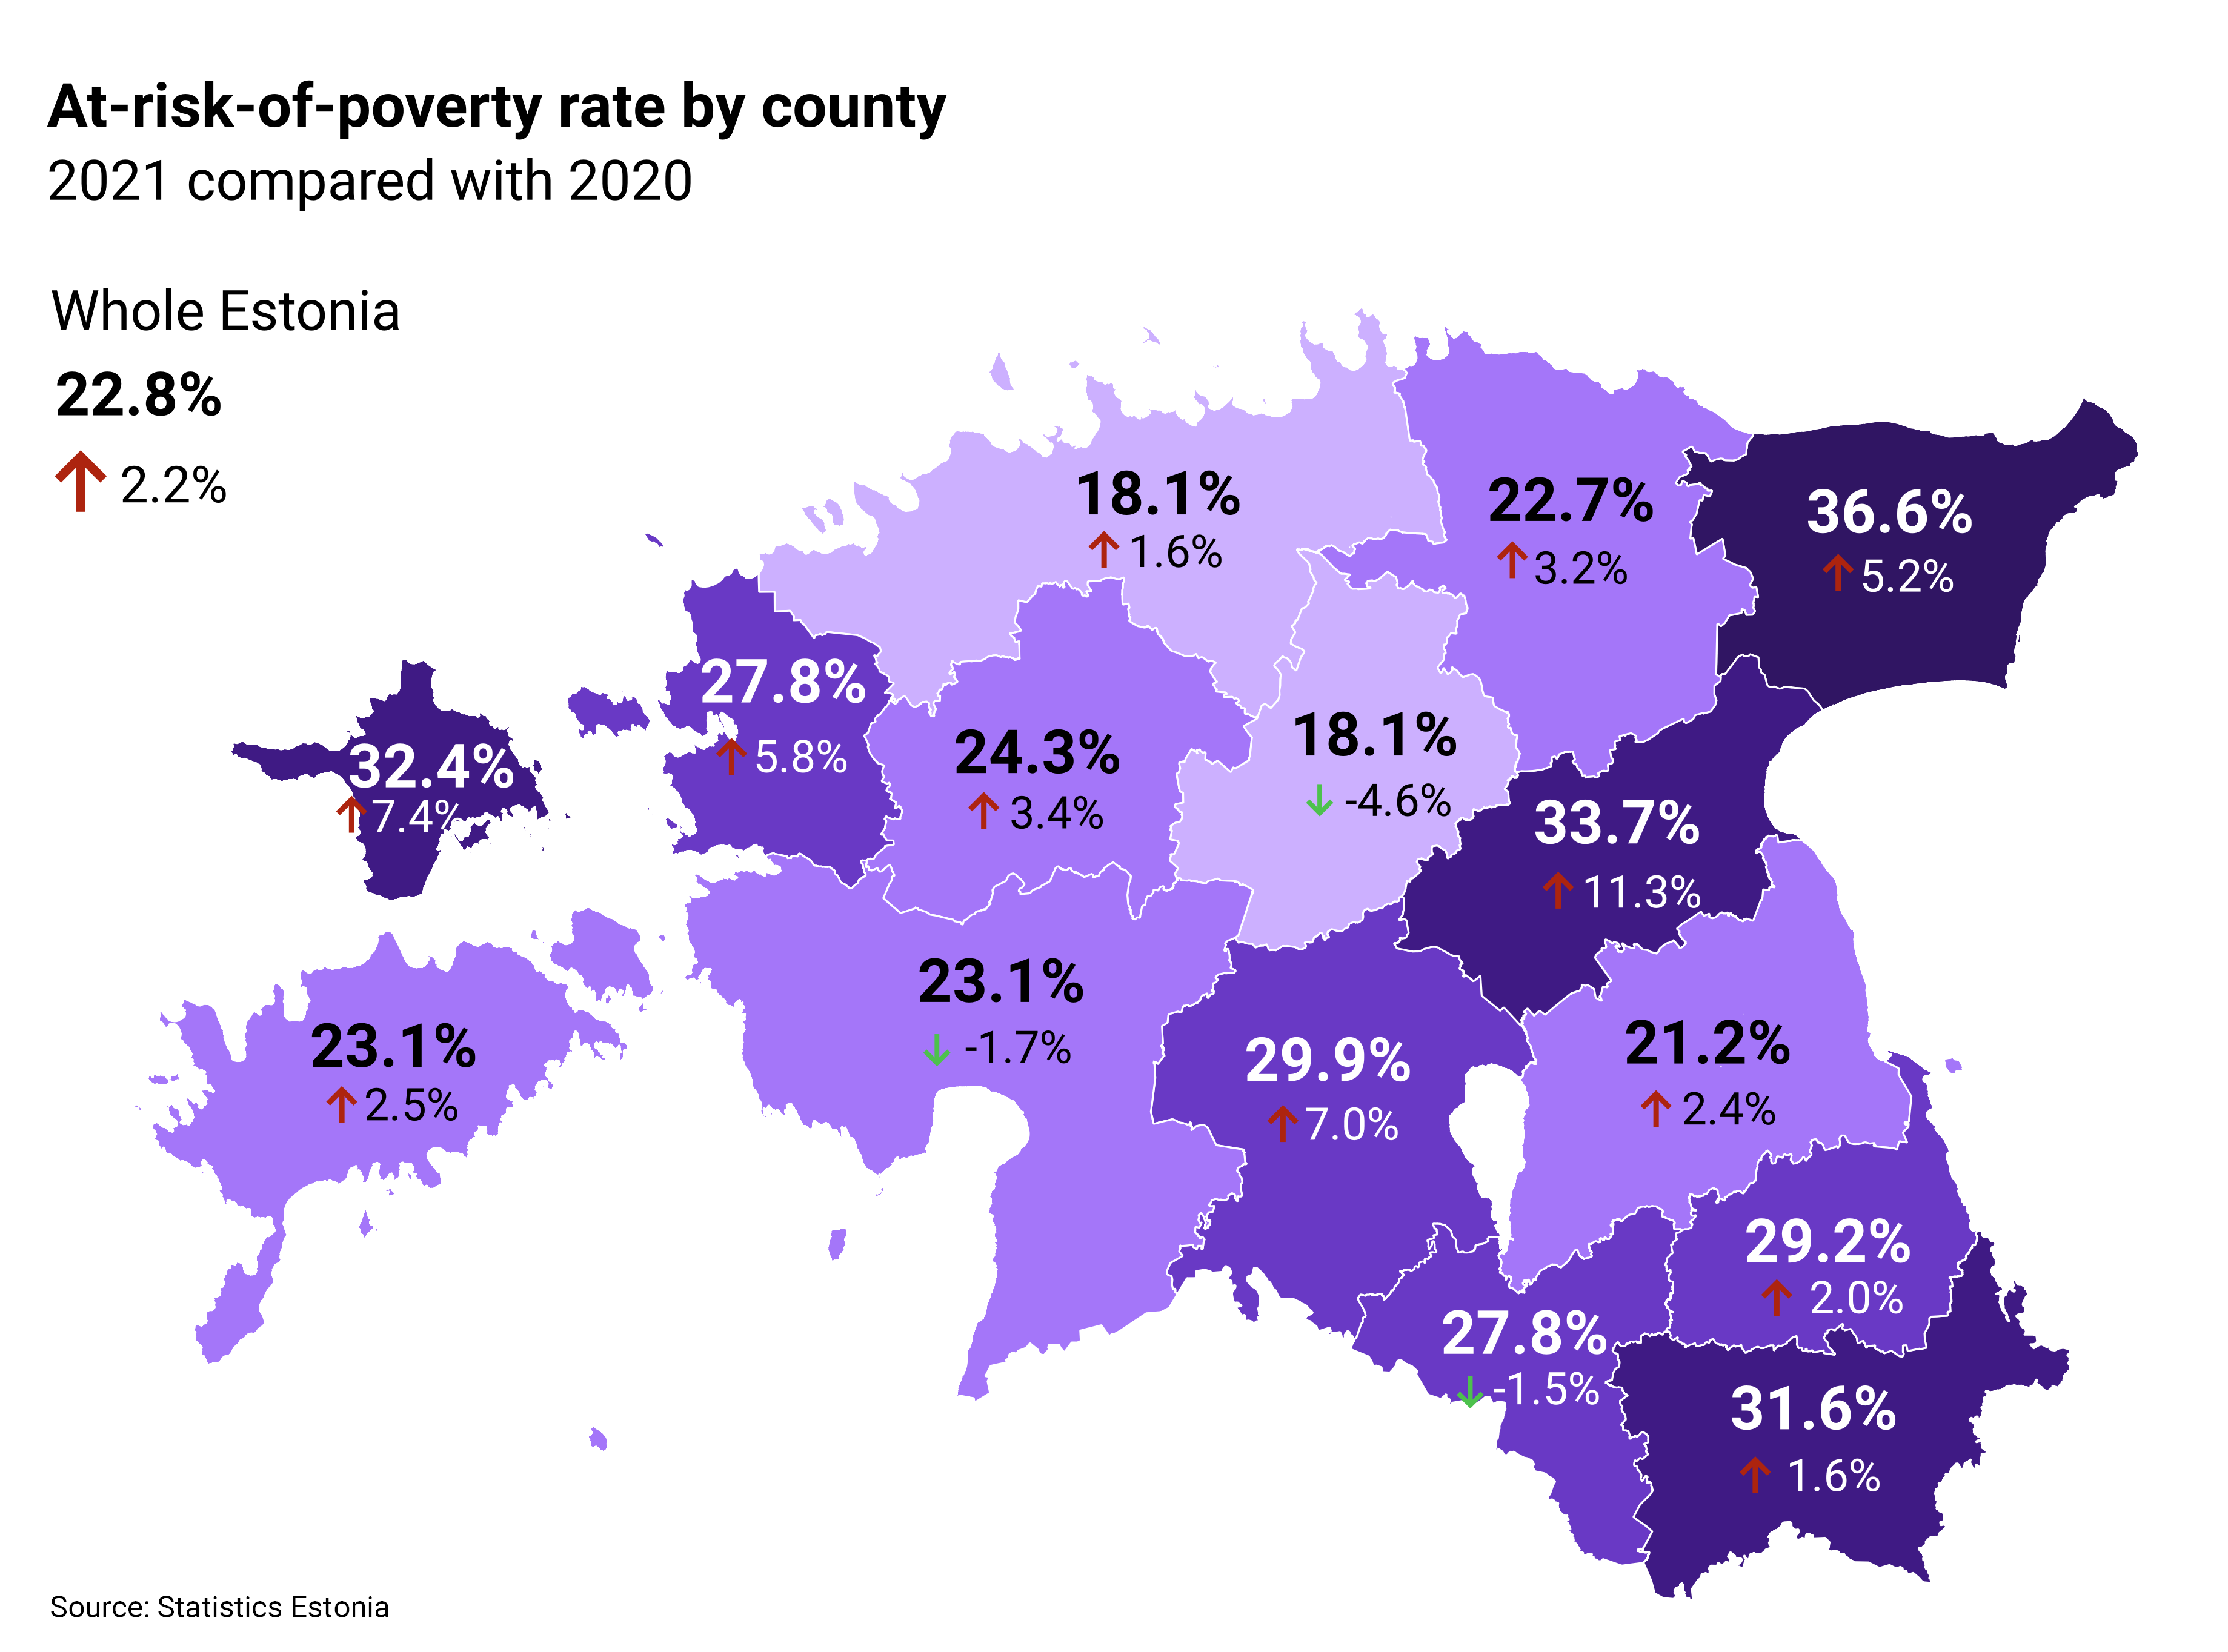 At-risk-of-poverty rate by county